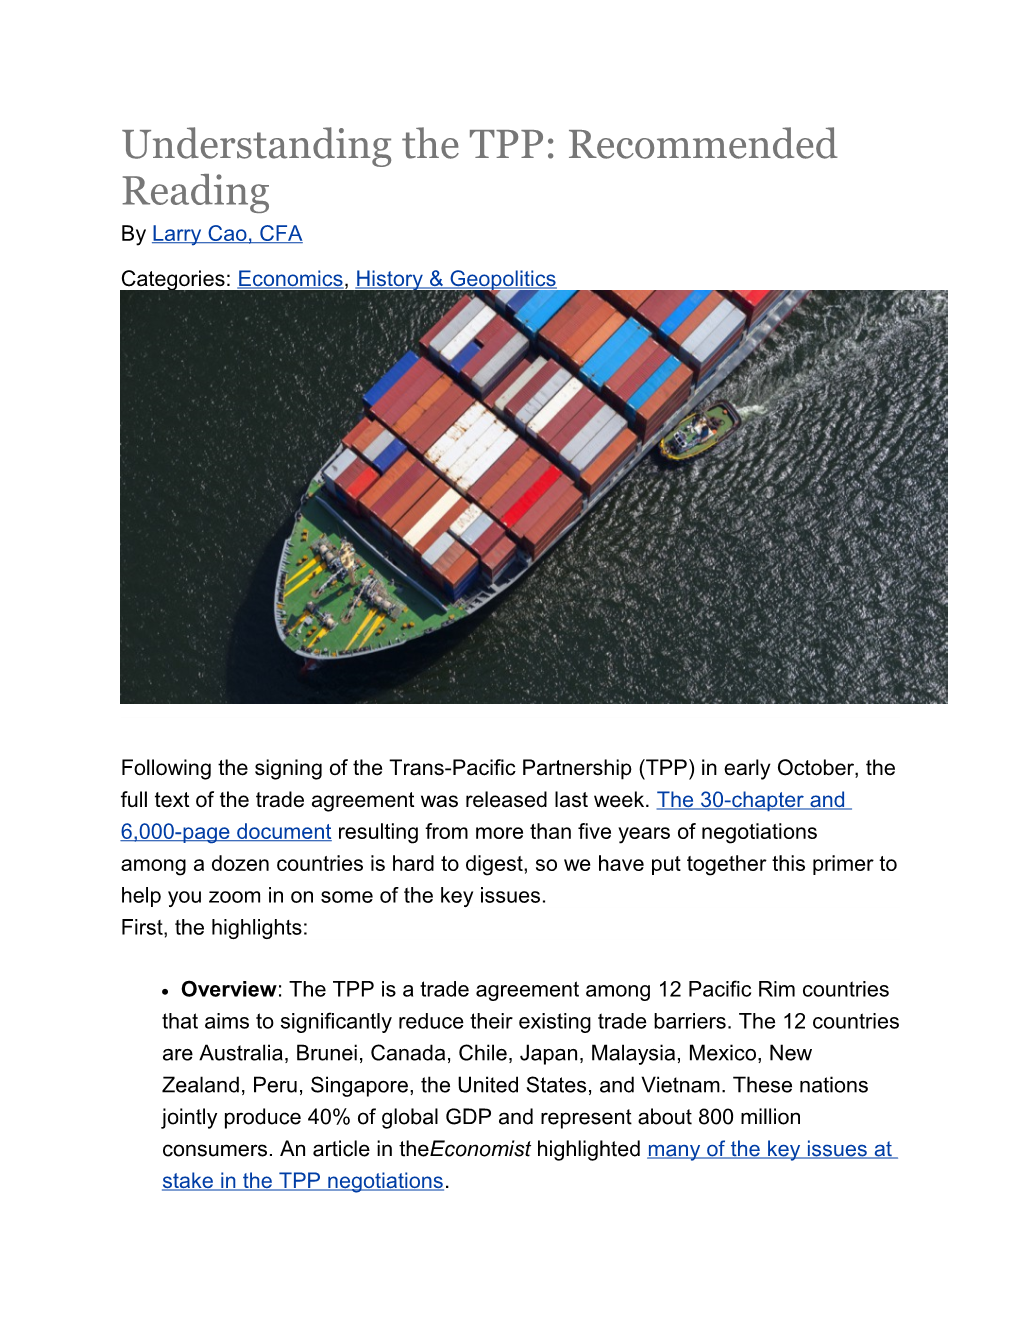 Understanding the TPP: Recommended Reading